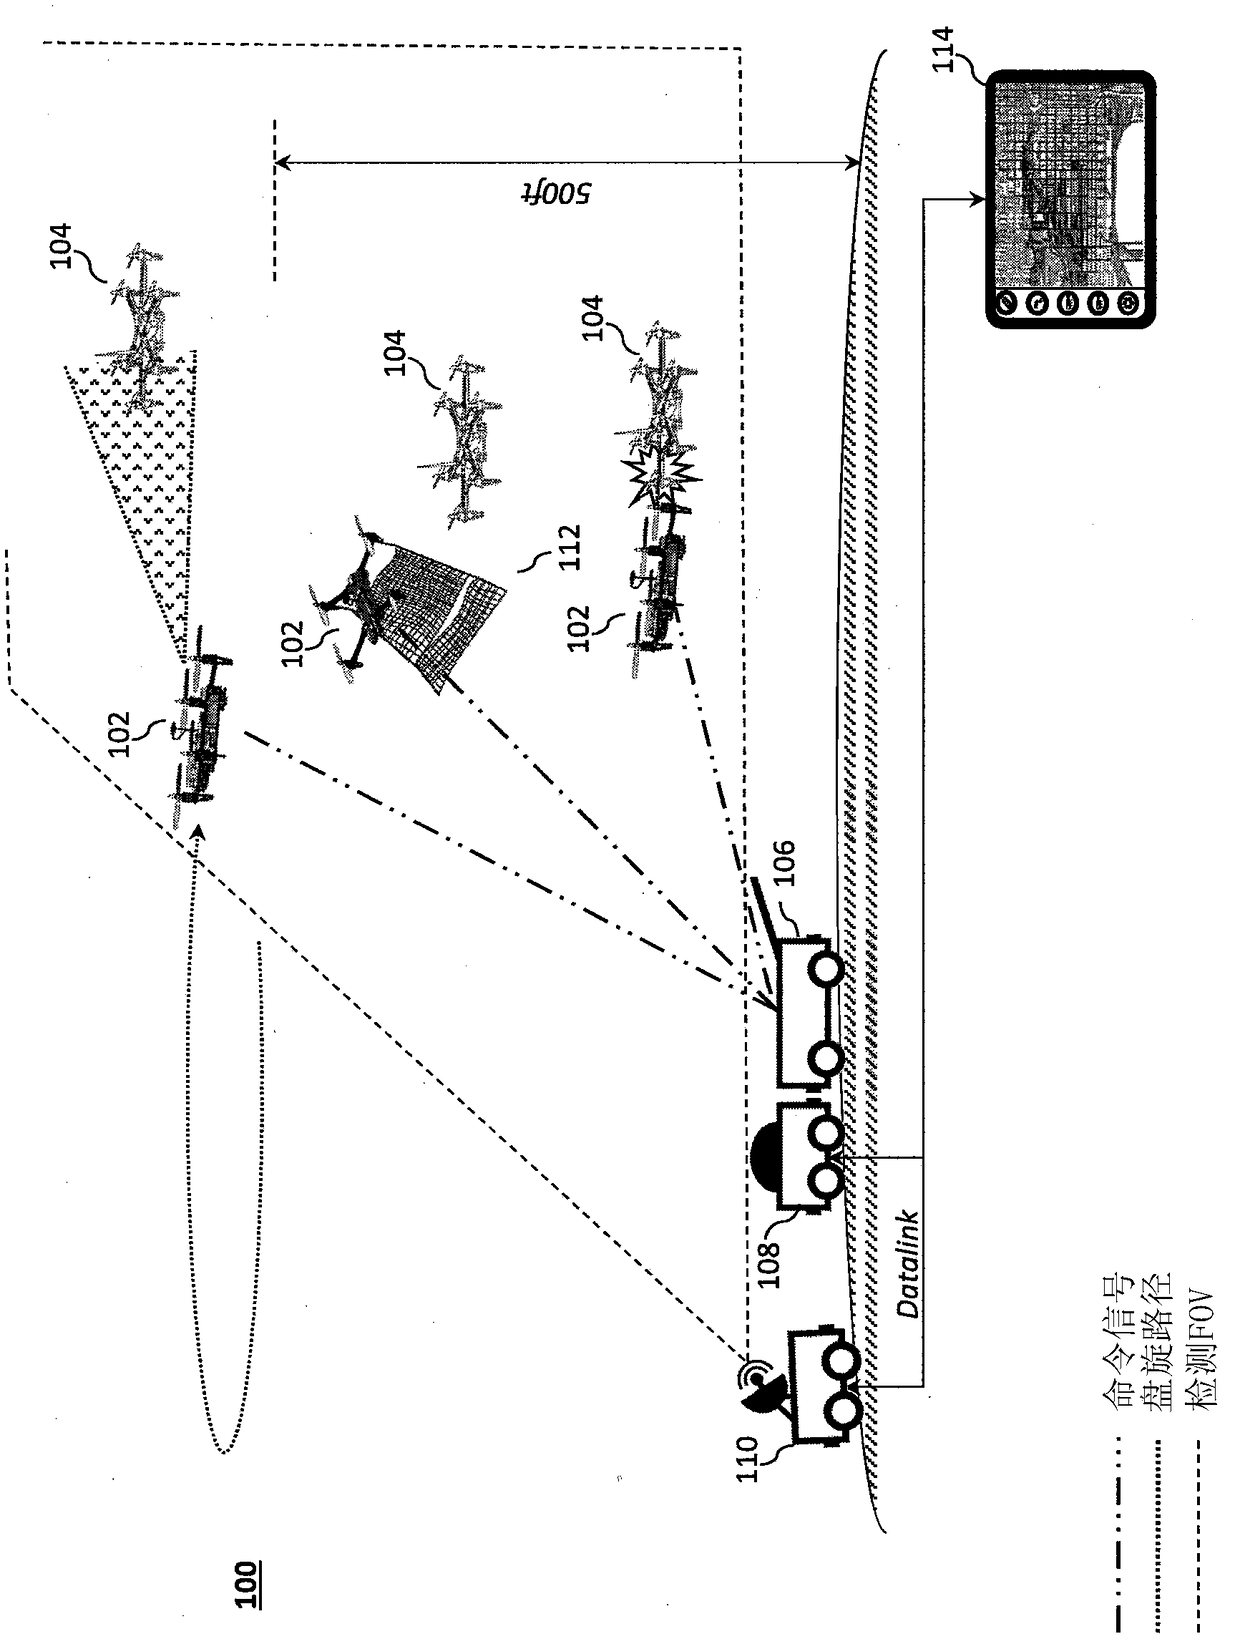 Aerial vehicle imaging and targeting system